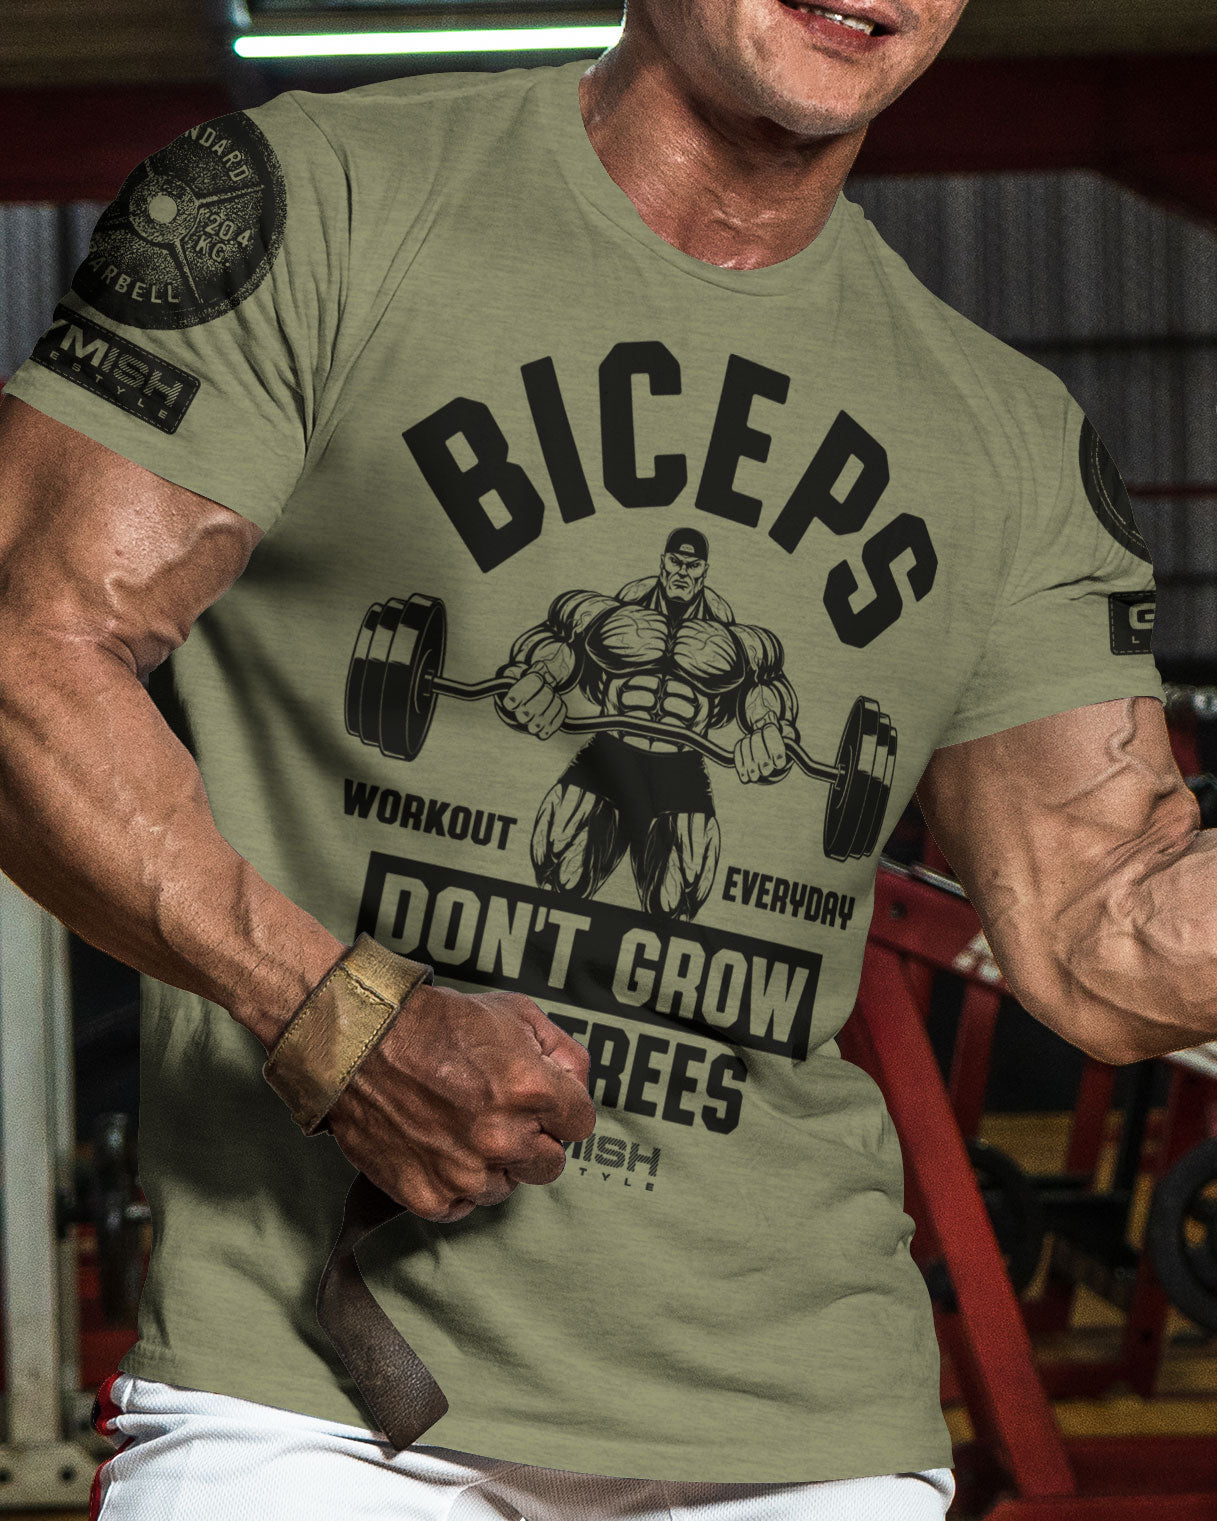 034. BICEPS Don't Grow On Trees Workout T-Shirt